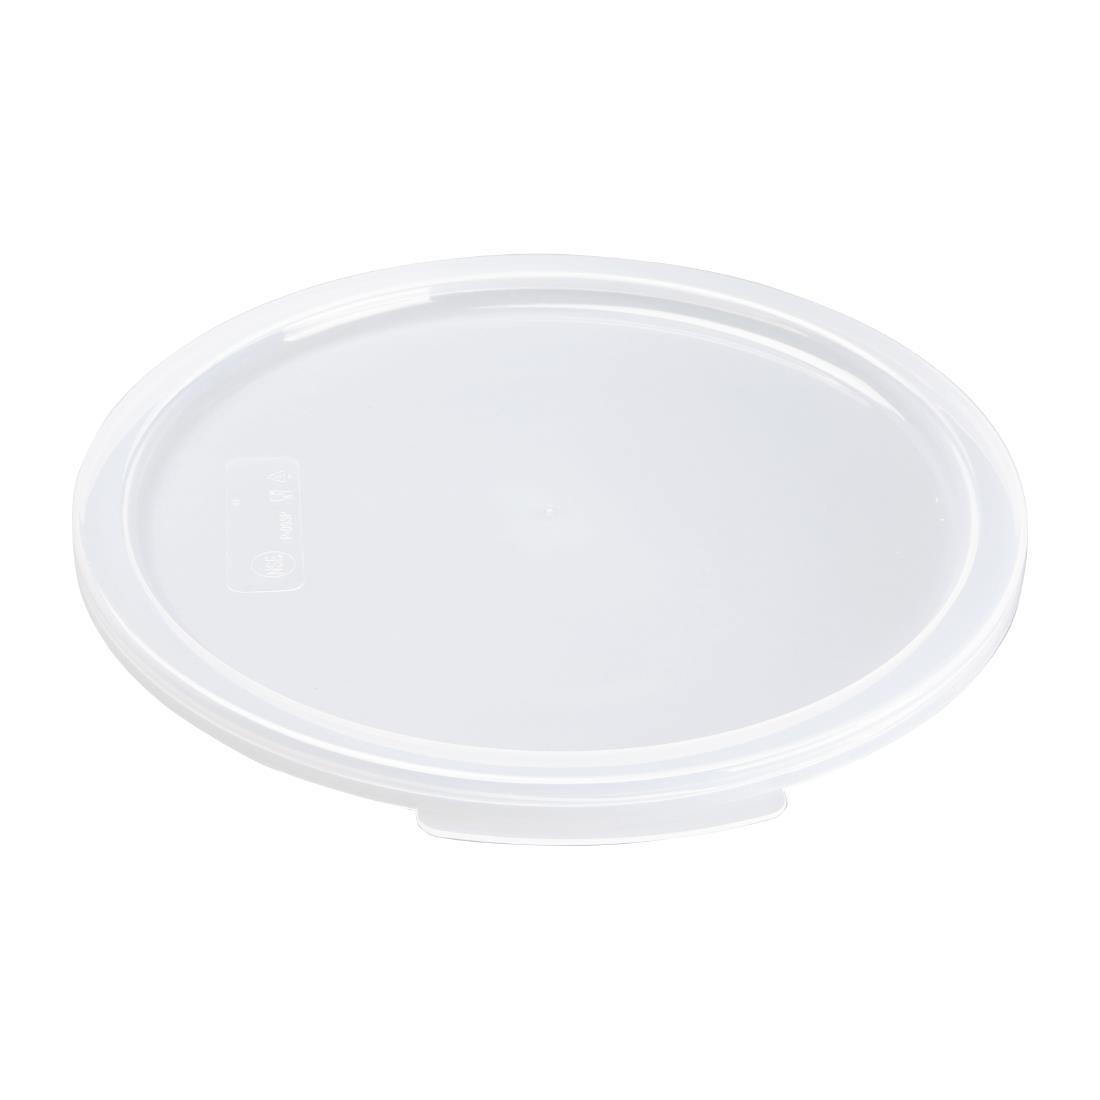 Lid for Vogue Round Food Storage Container 7.5Ltr - DJ963  - 2